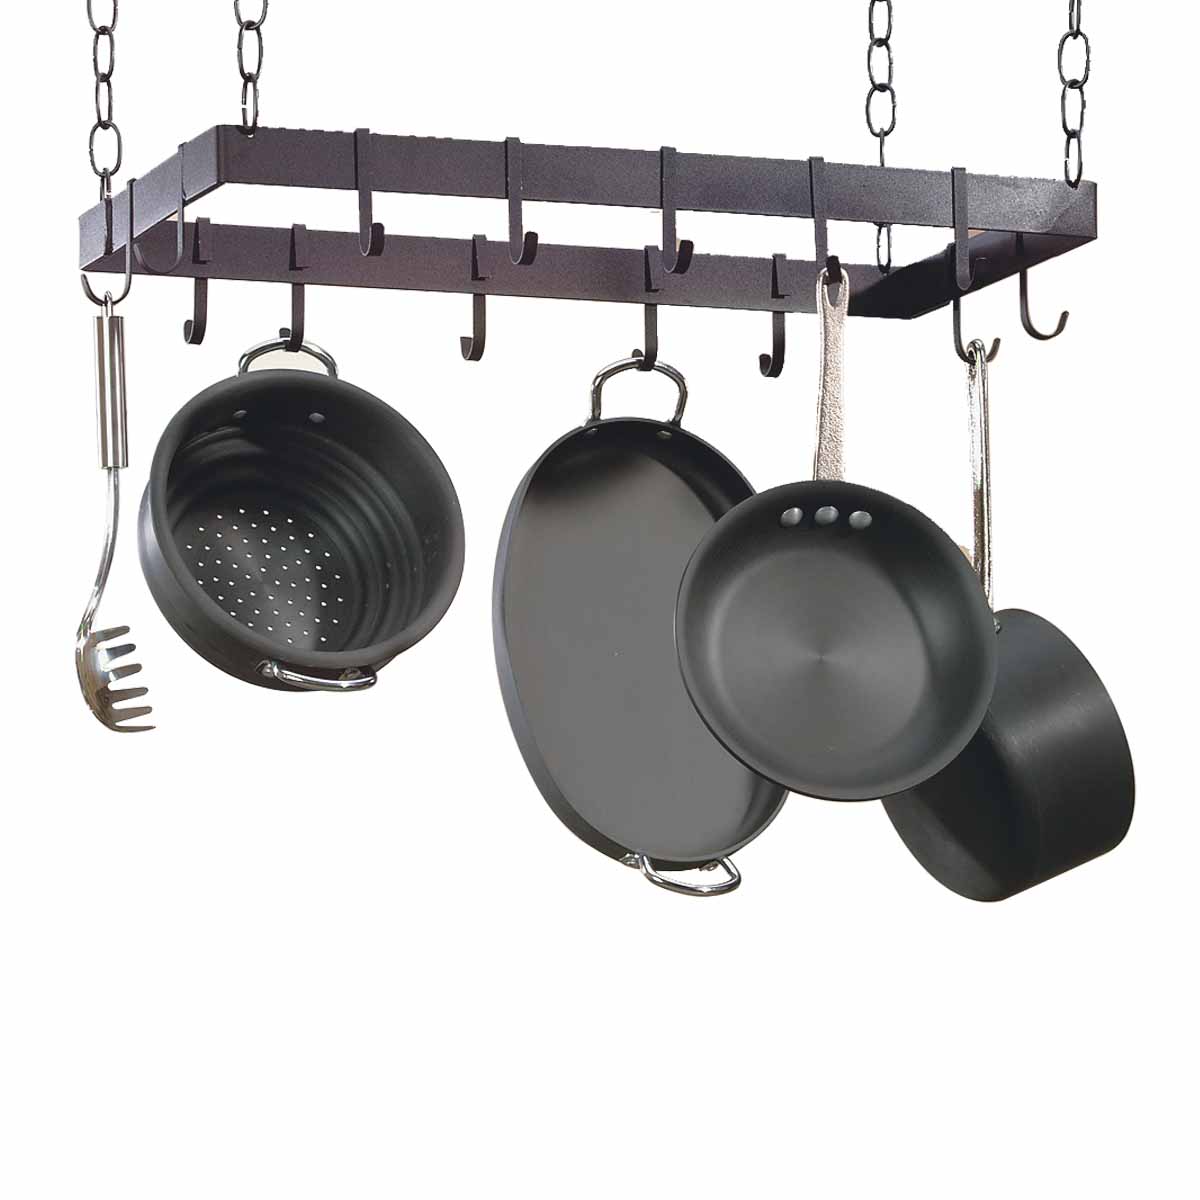 https://wroughtworks.com/images/wrought-iron/wrought-iron-pot-rack-rectangle.jpg